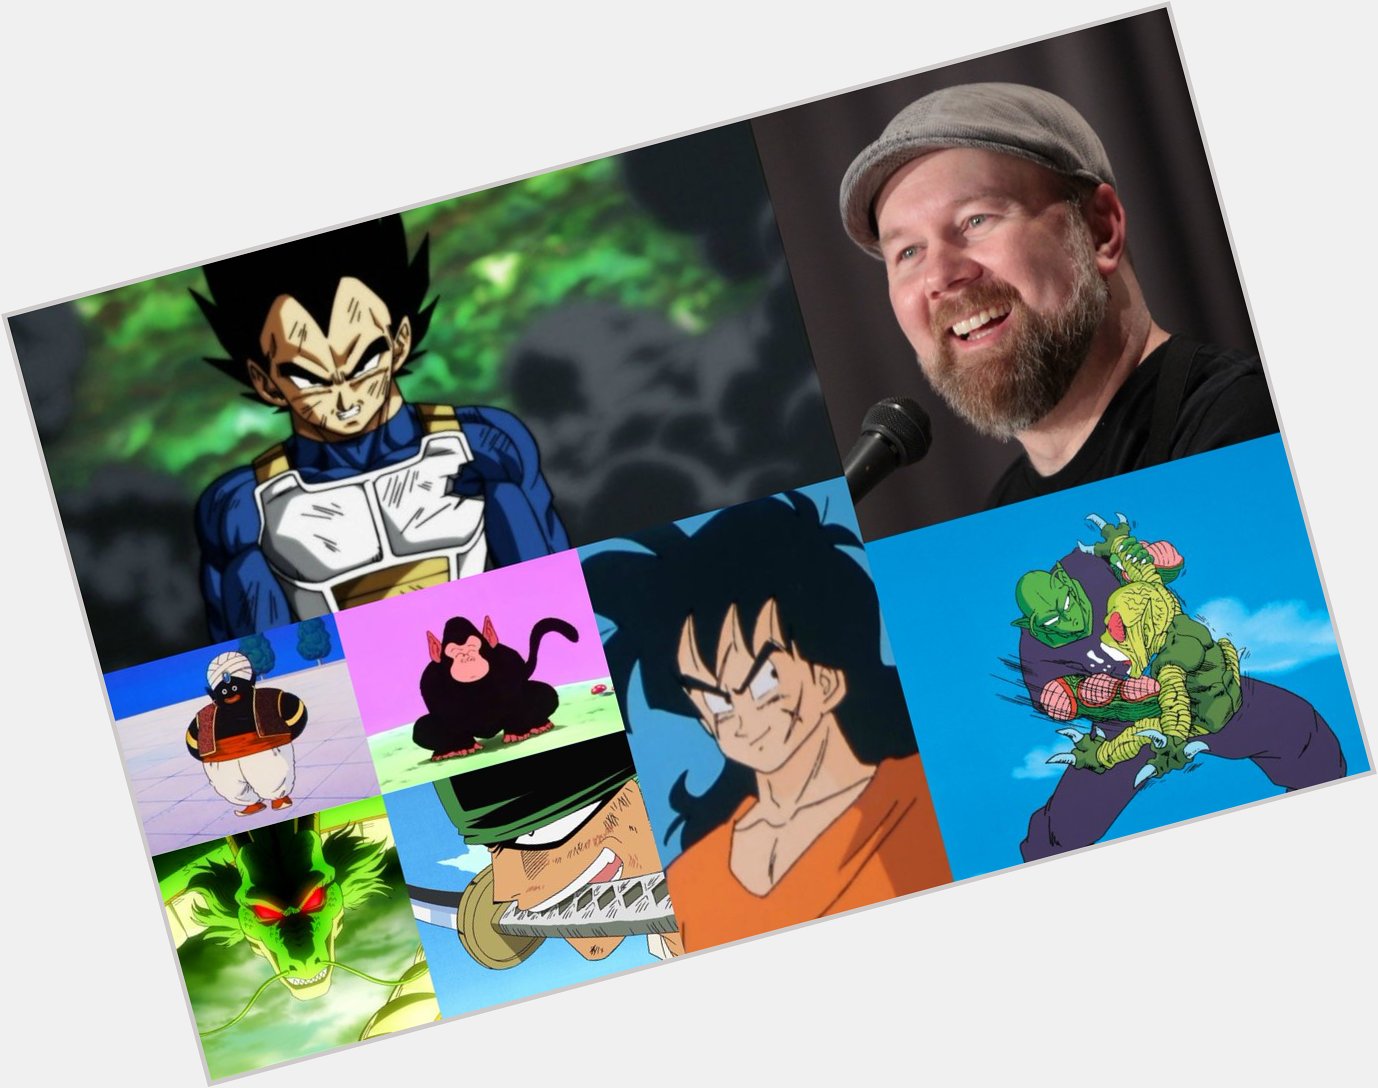 Happy Birthday Christopher Sabat,   So many wonderful voices from one amazing talent! Thank you! 